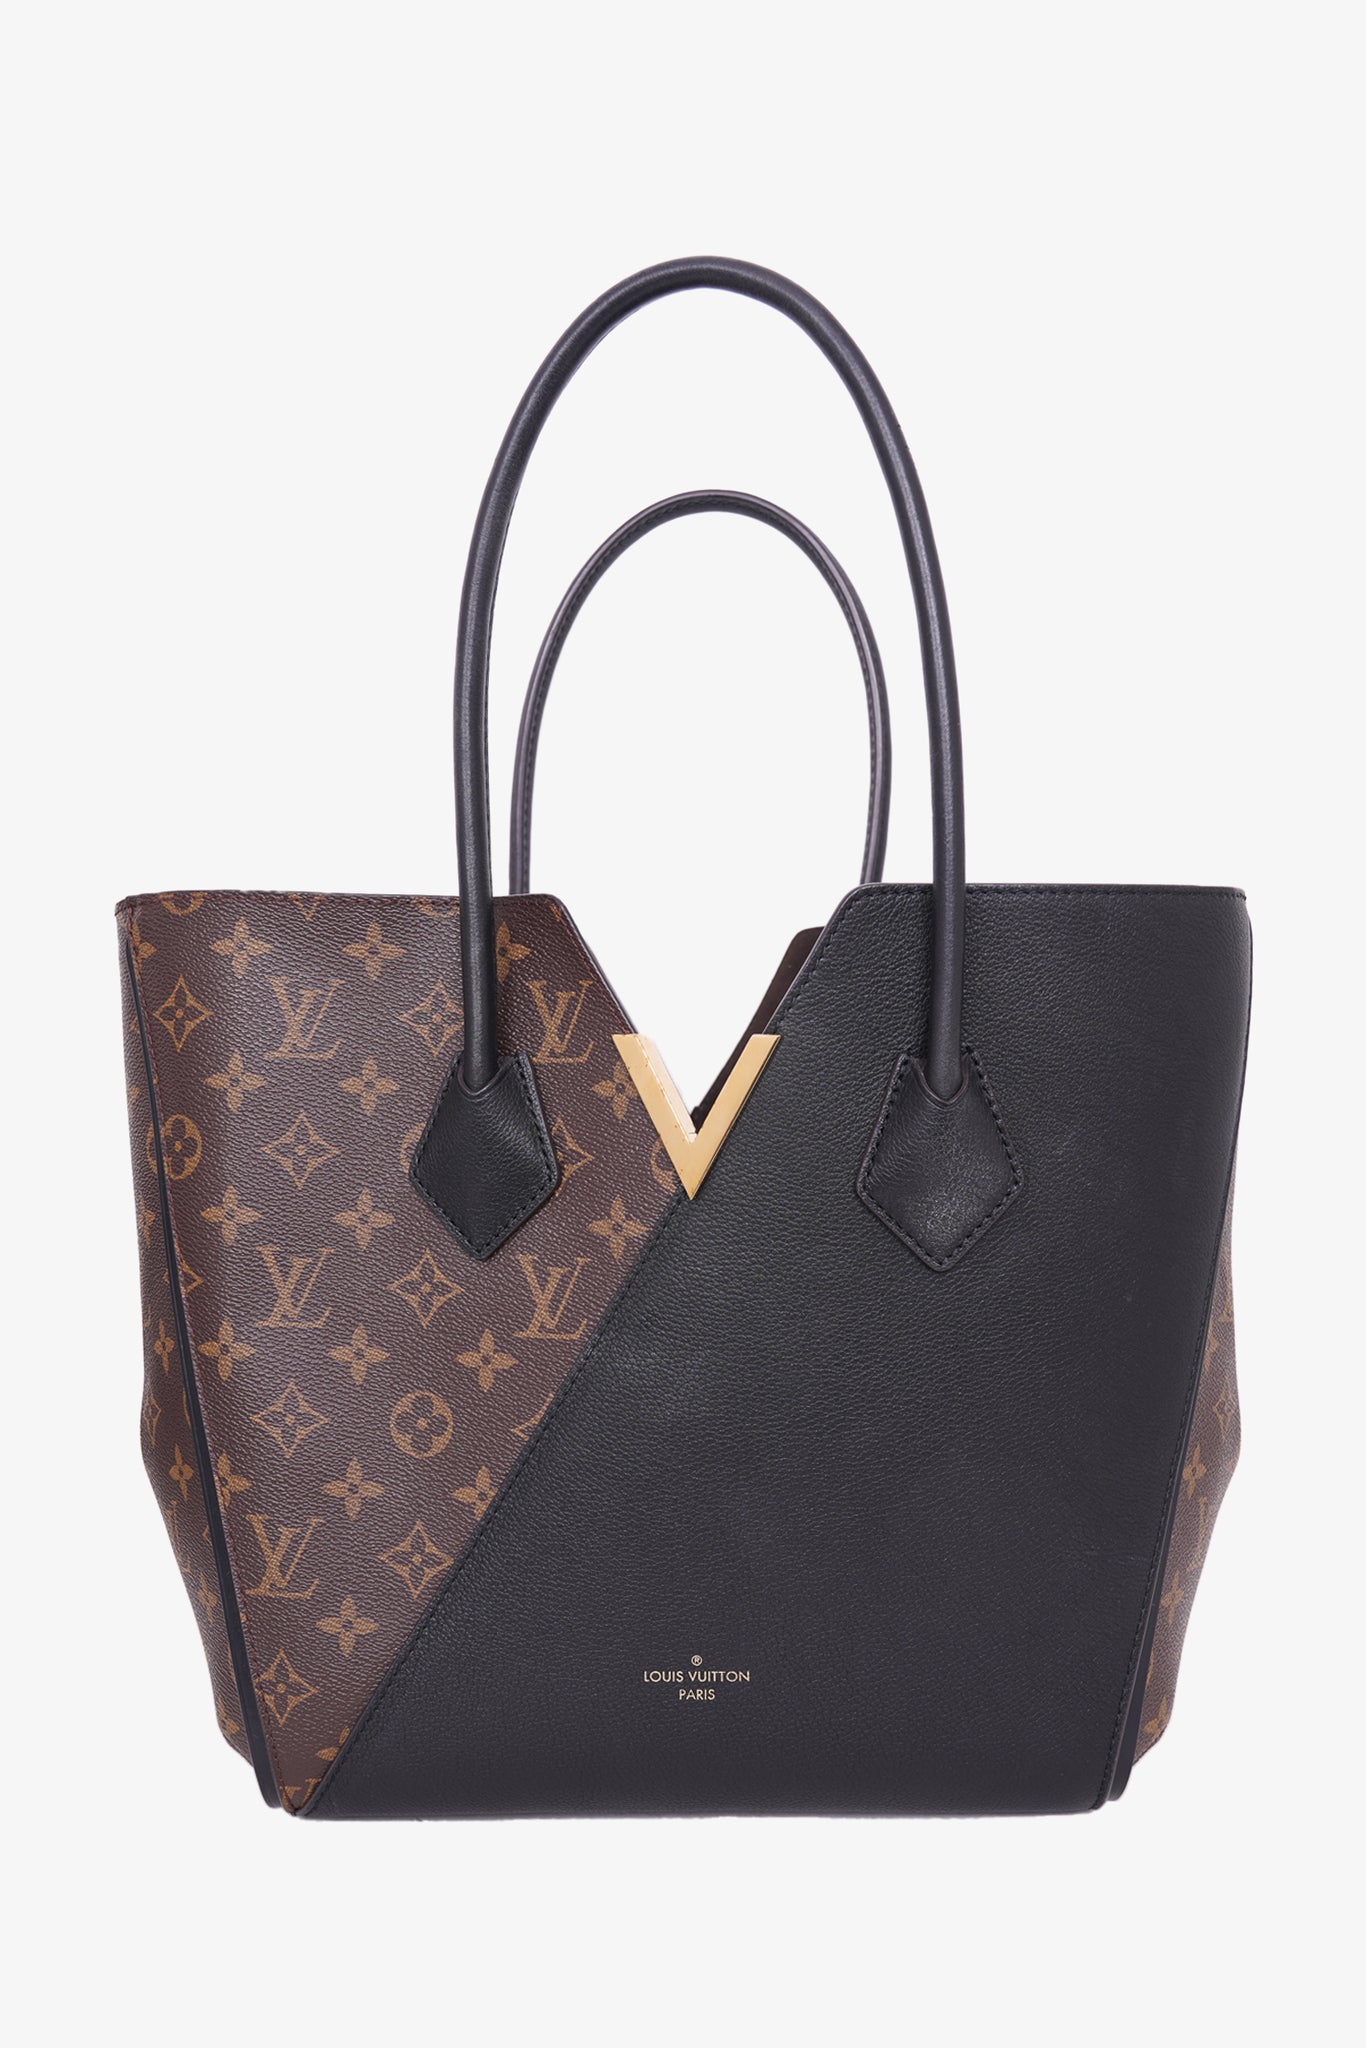 LV Monogram Neverfull MM - clothing & accessories - by owner - apparel sale  - craigslist